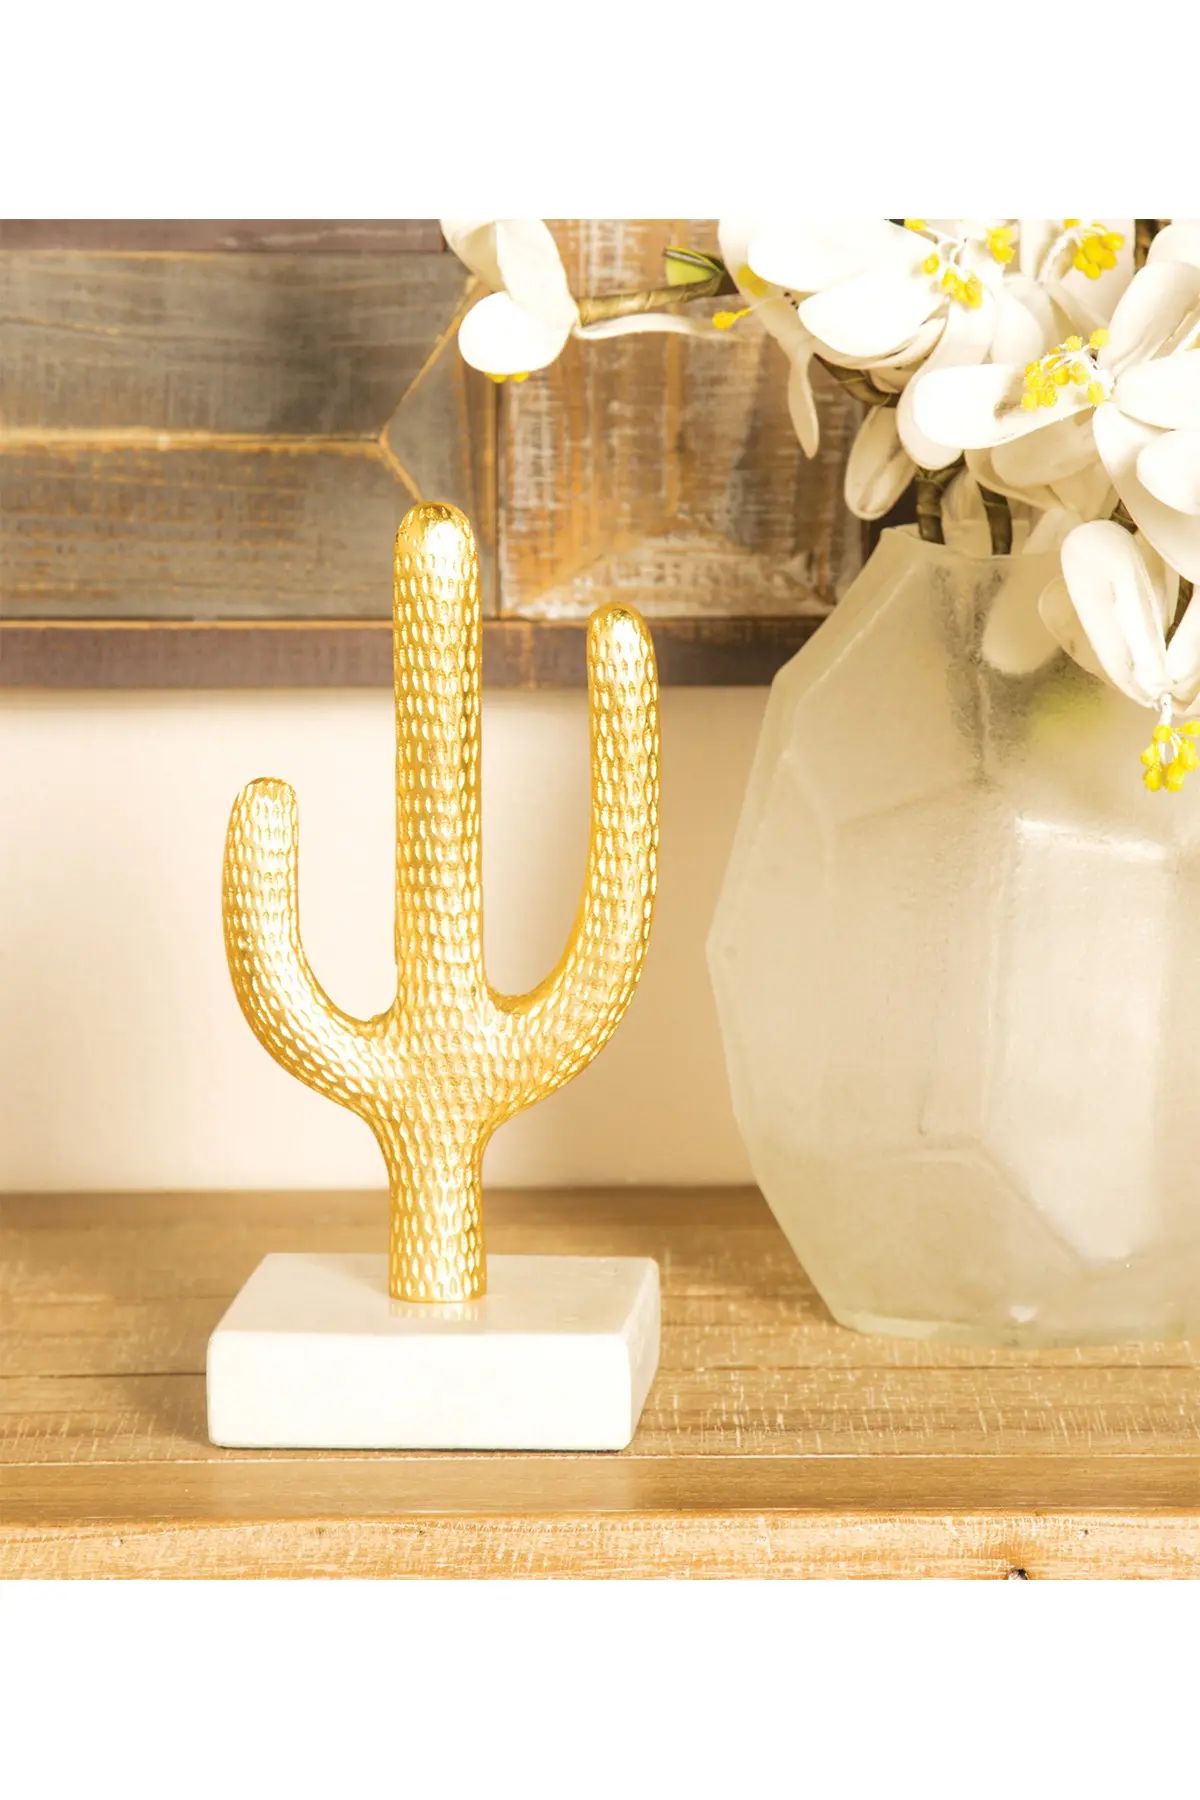 CosmoLiving by Cosmopolitan Small Metallic Gold Cactus Sculpture Table Decor on White Marble Base at | Nordstrom Rack